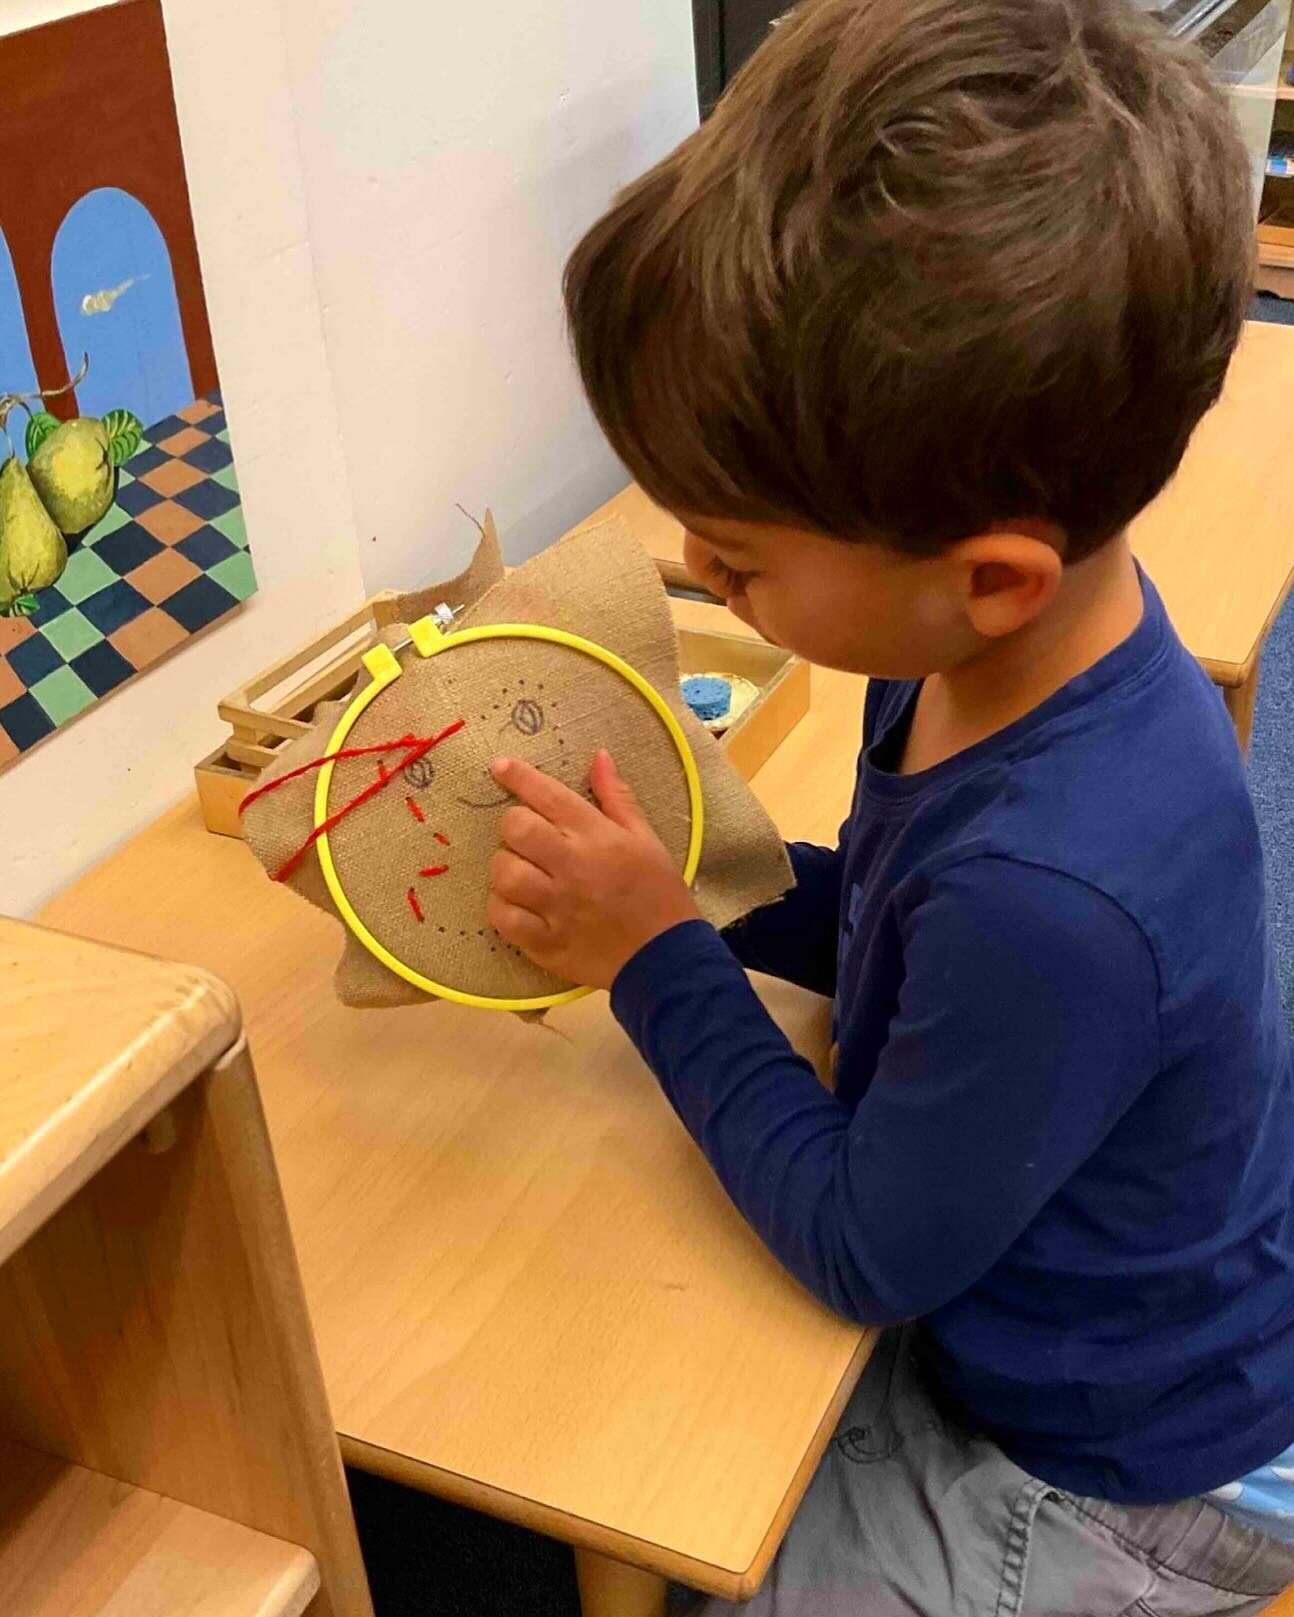 This child is sewing a frog. The dots on the cloth guide his placement of the needle. The dots are intentionally close together to encourage making small stitches in order to create a defined shape. With practice the child will be able to sew an outl